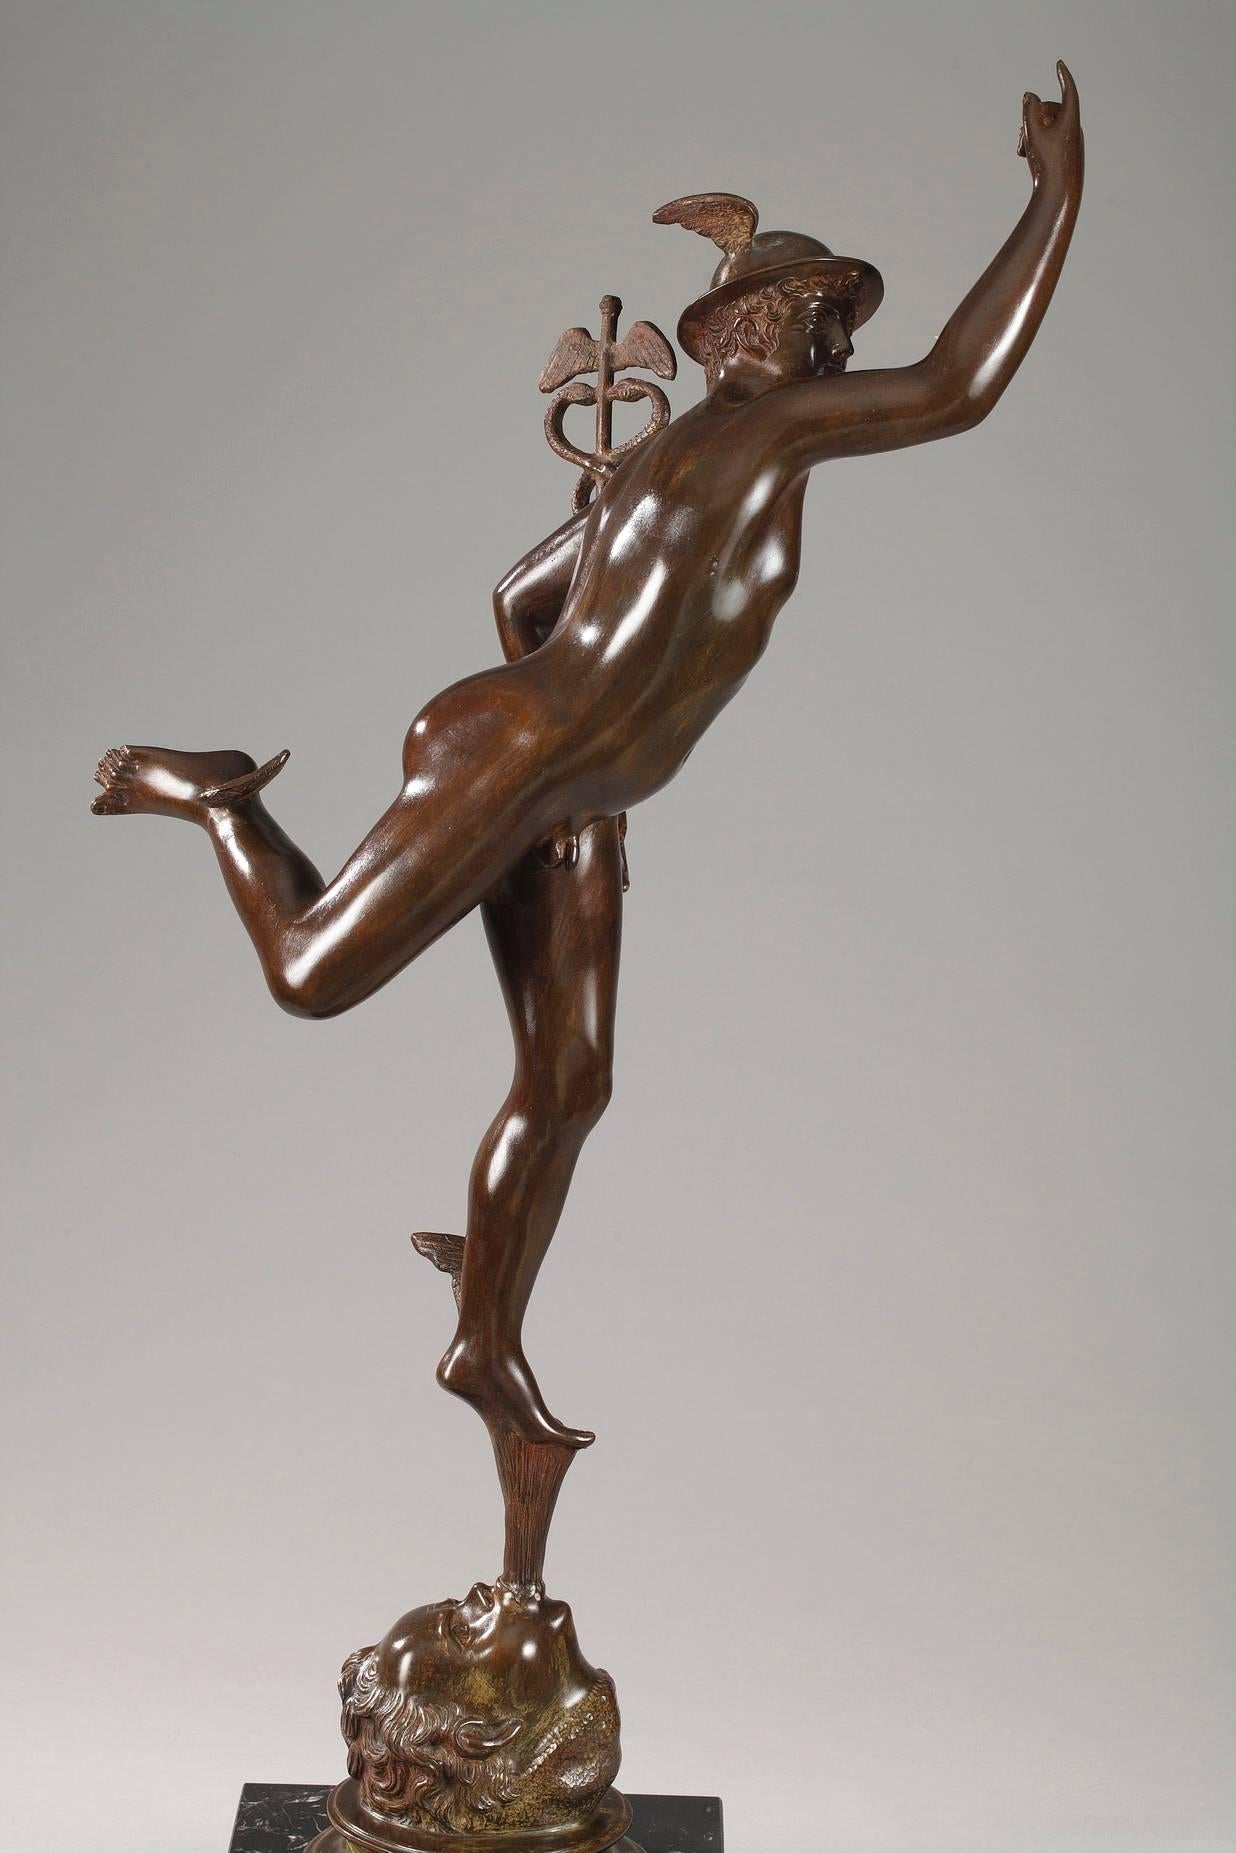 Large mythological bronze representing Mercury or Hermes, the messenger of the gods. He is wearing his winged, round petasos hat and carrying a caduceus in his left hand. The wings on his ankles enable him to move quickly and are one of his